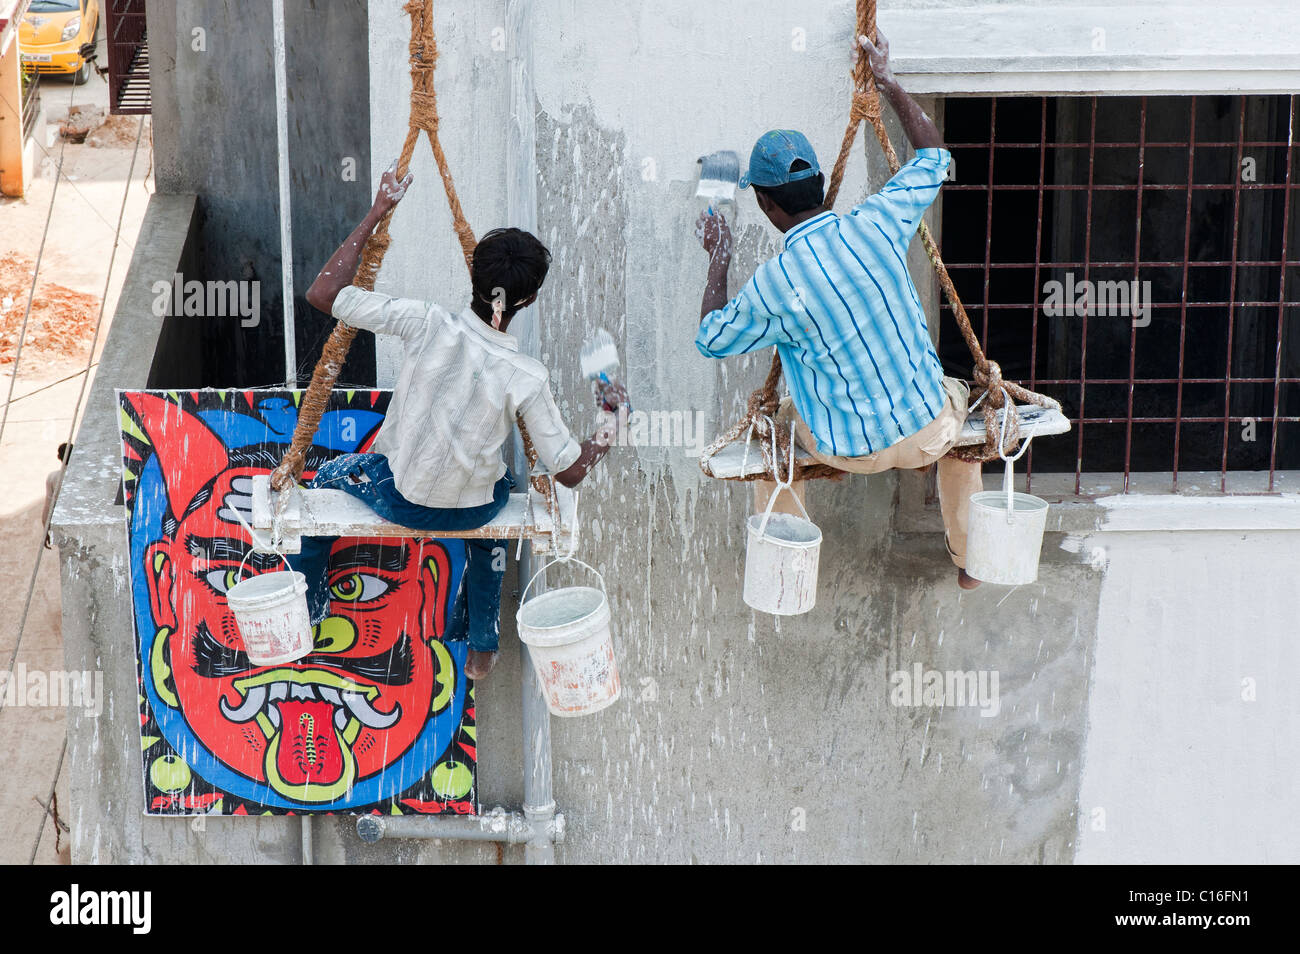 Two indian painters sitting on a wooden seat hanging from ropes painting the side of an apartment complex. Puttaparthi, Andhra Pradesh, India Stock Photo